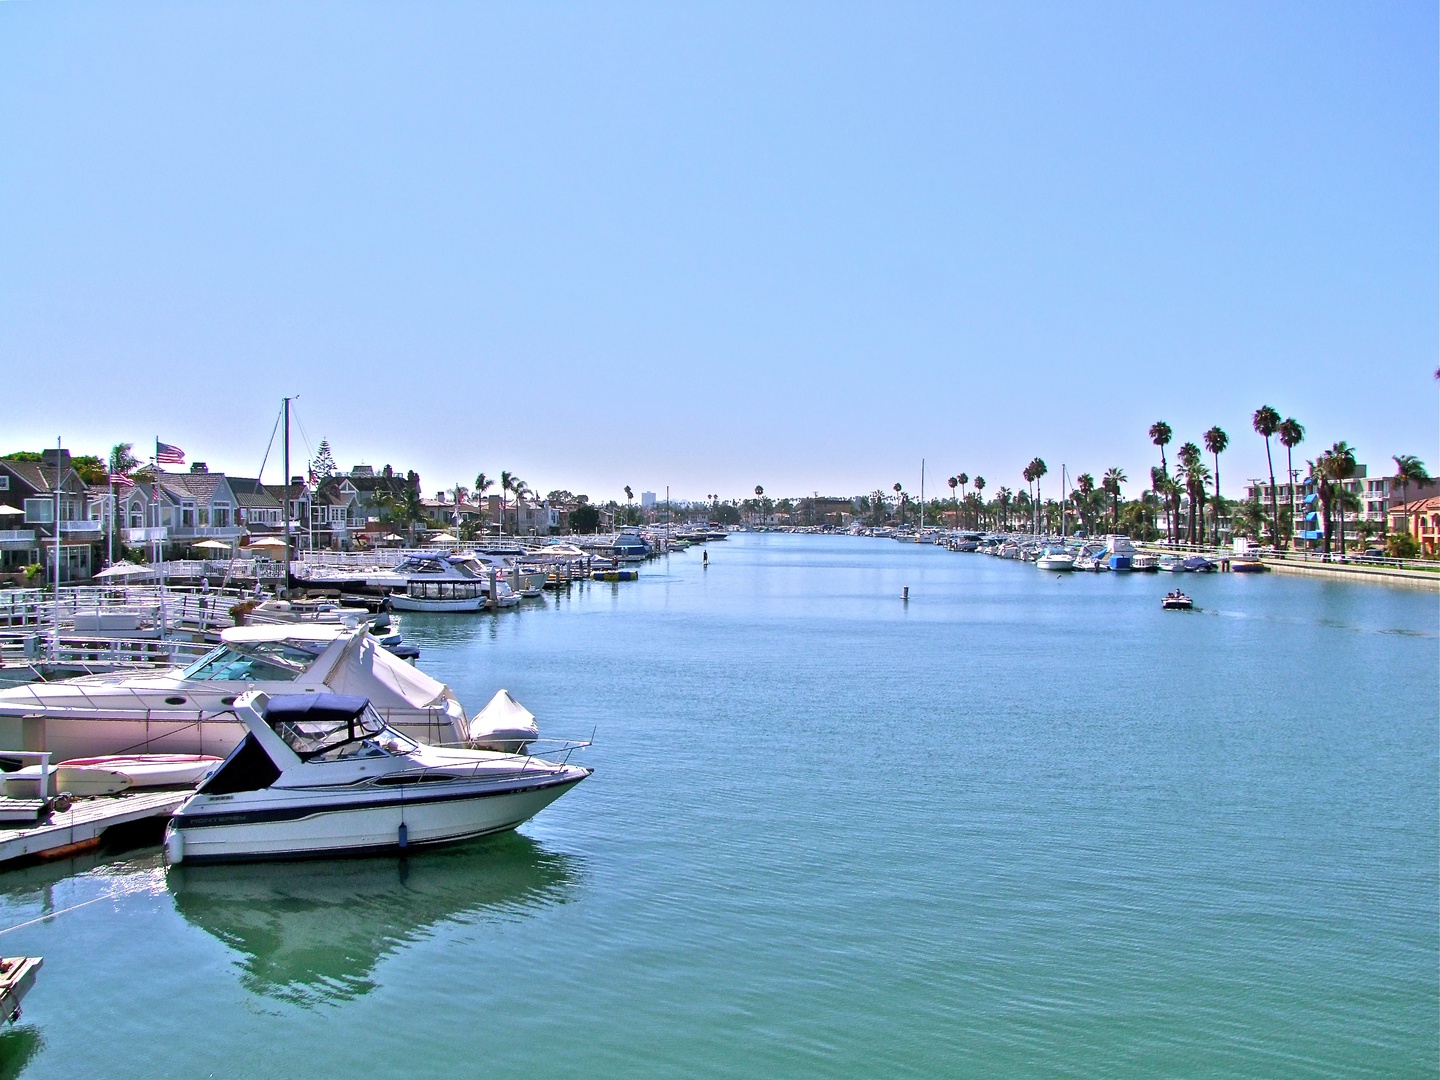 Enjoy being within walking distance to all the fantastic attractions Long Beach has to offer!